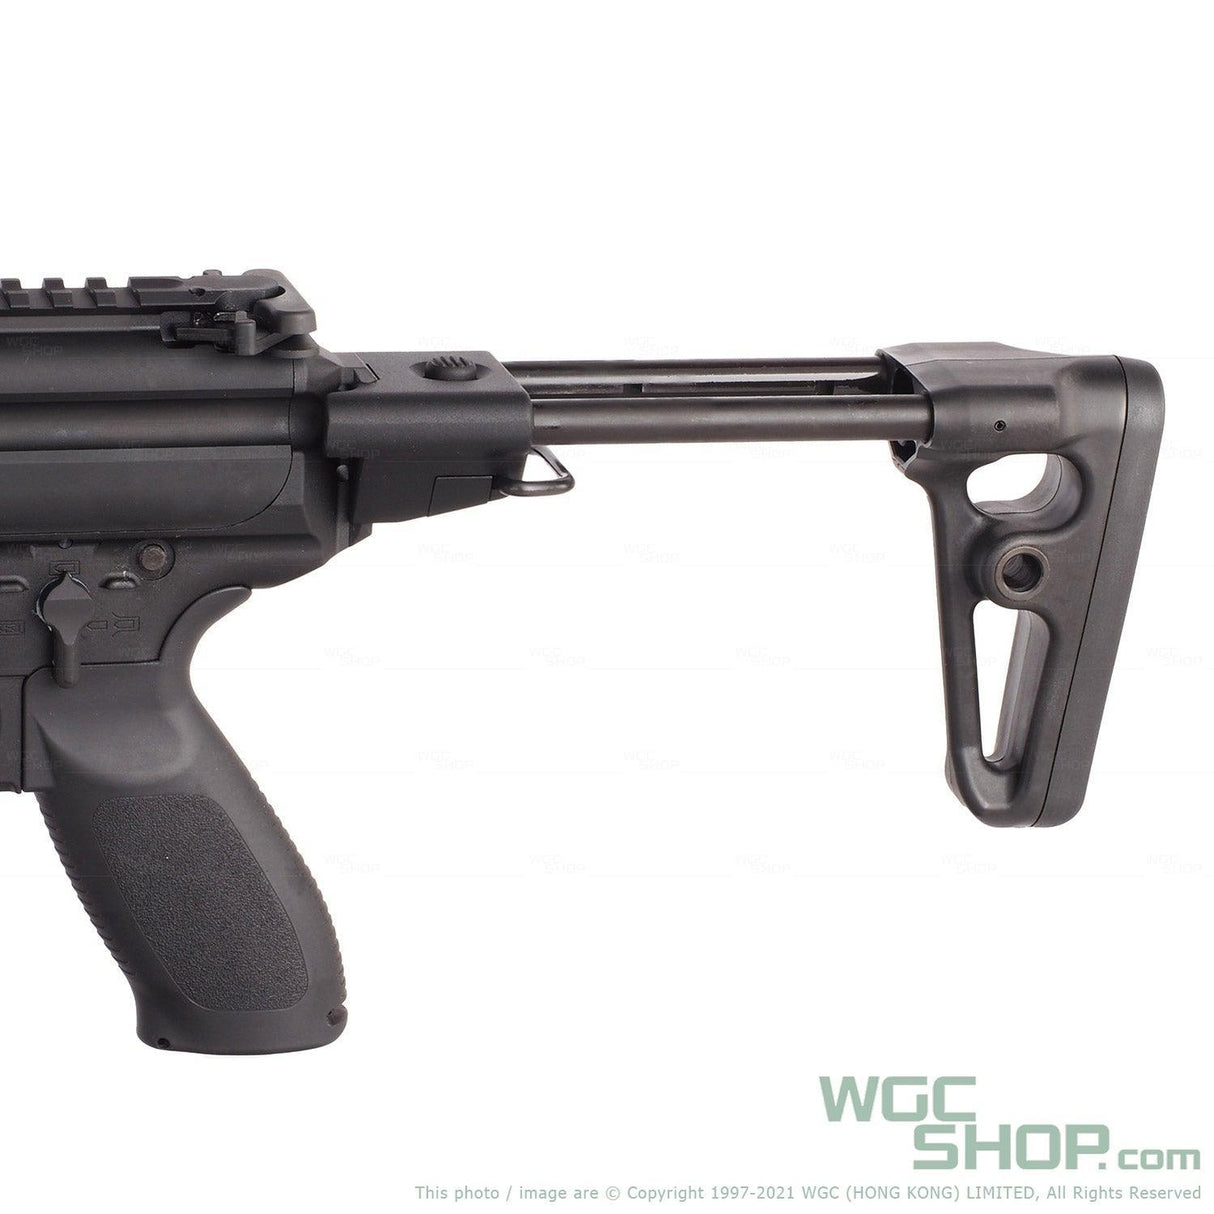 VFC Original Parts - MPX / MCX Retractable Stock ( V02DSTK000 / Disassembly Parts without Packing ) - WGC Shop